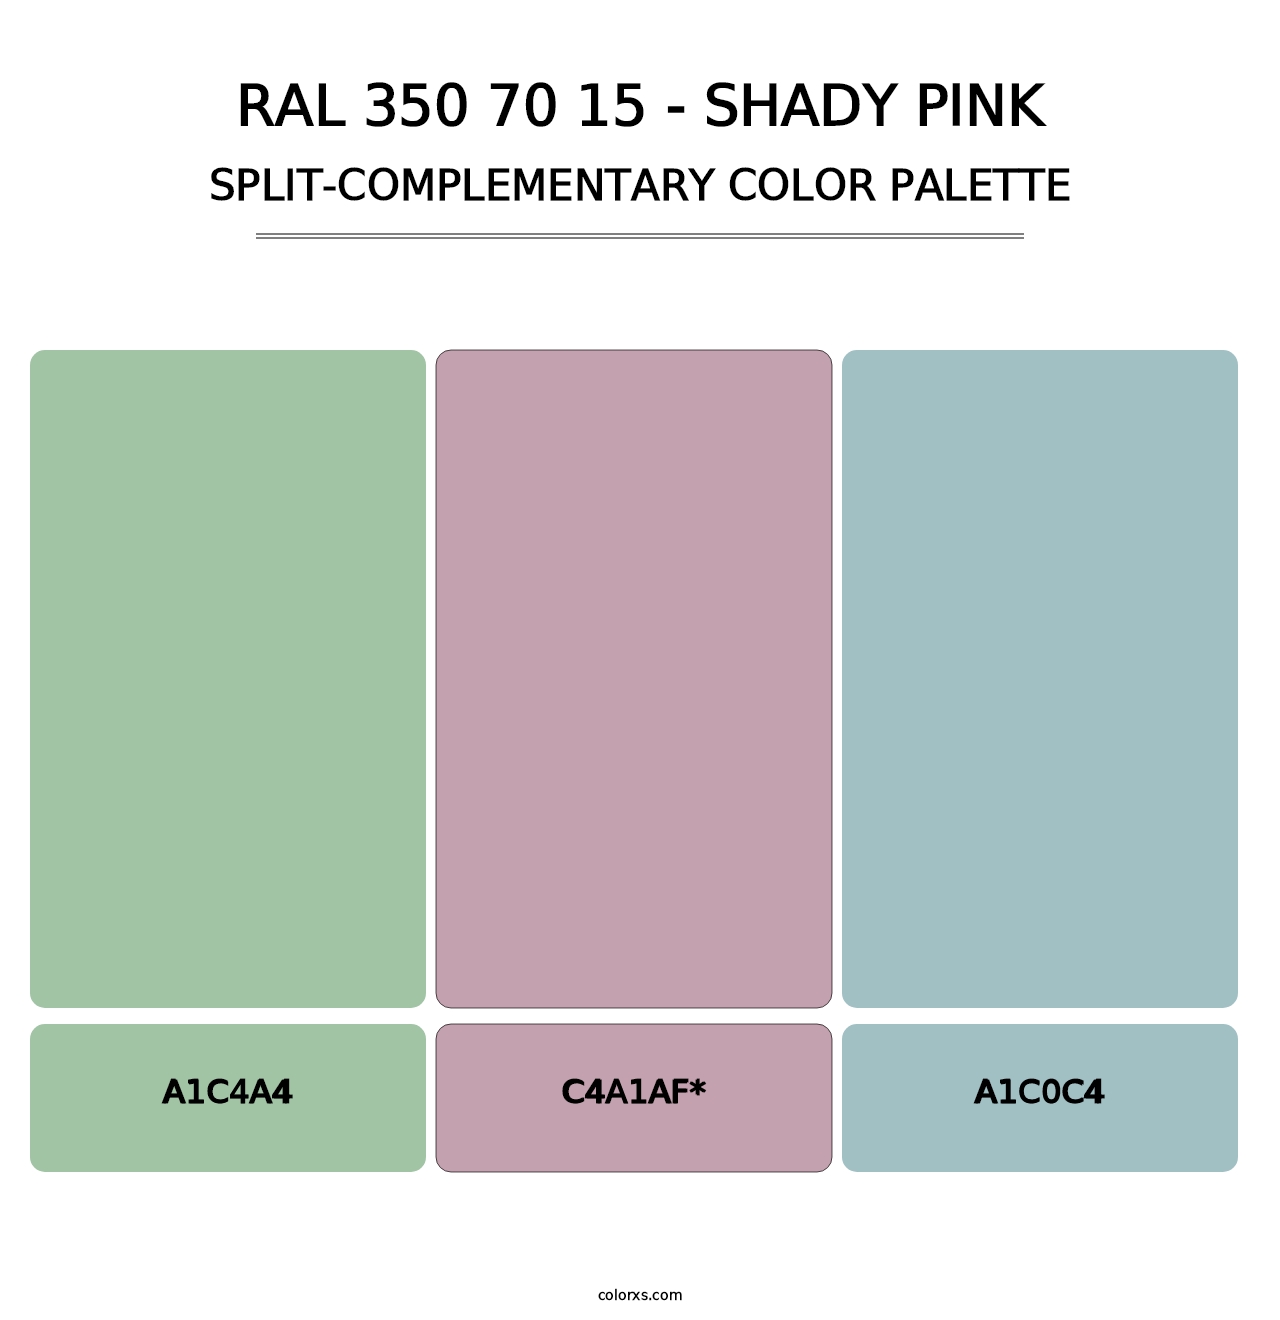 RAL 350 70 15 - Shady Pink - Split-Complementary Color Palette